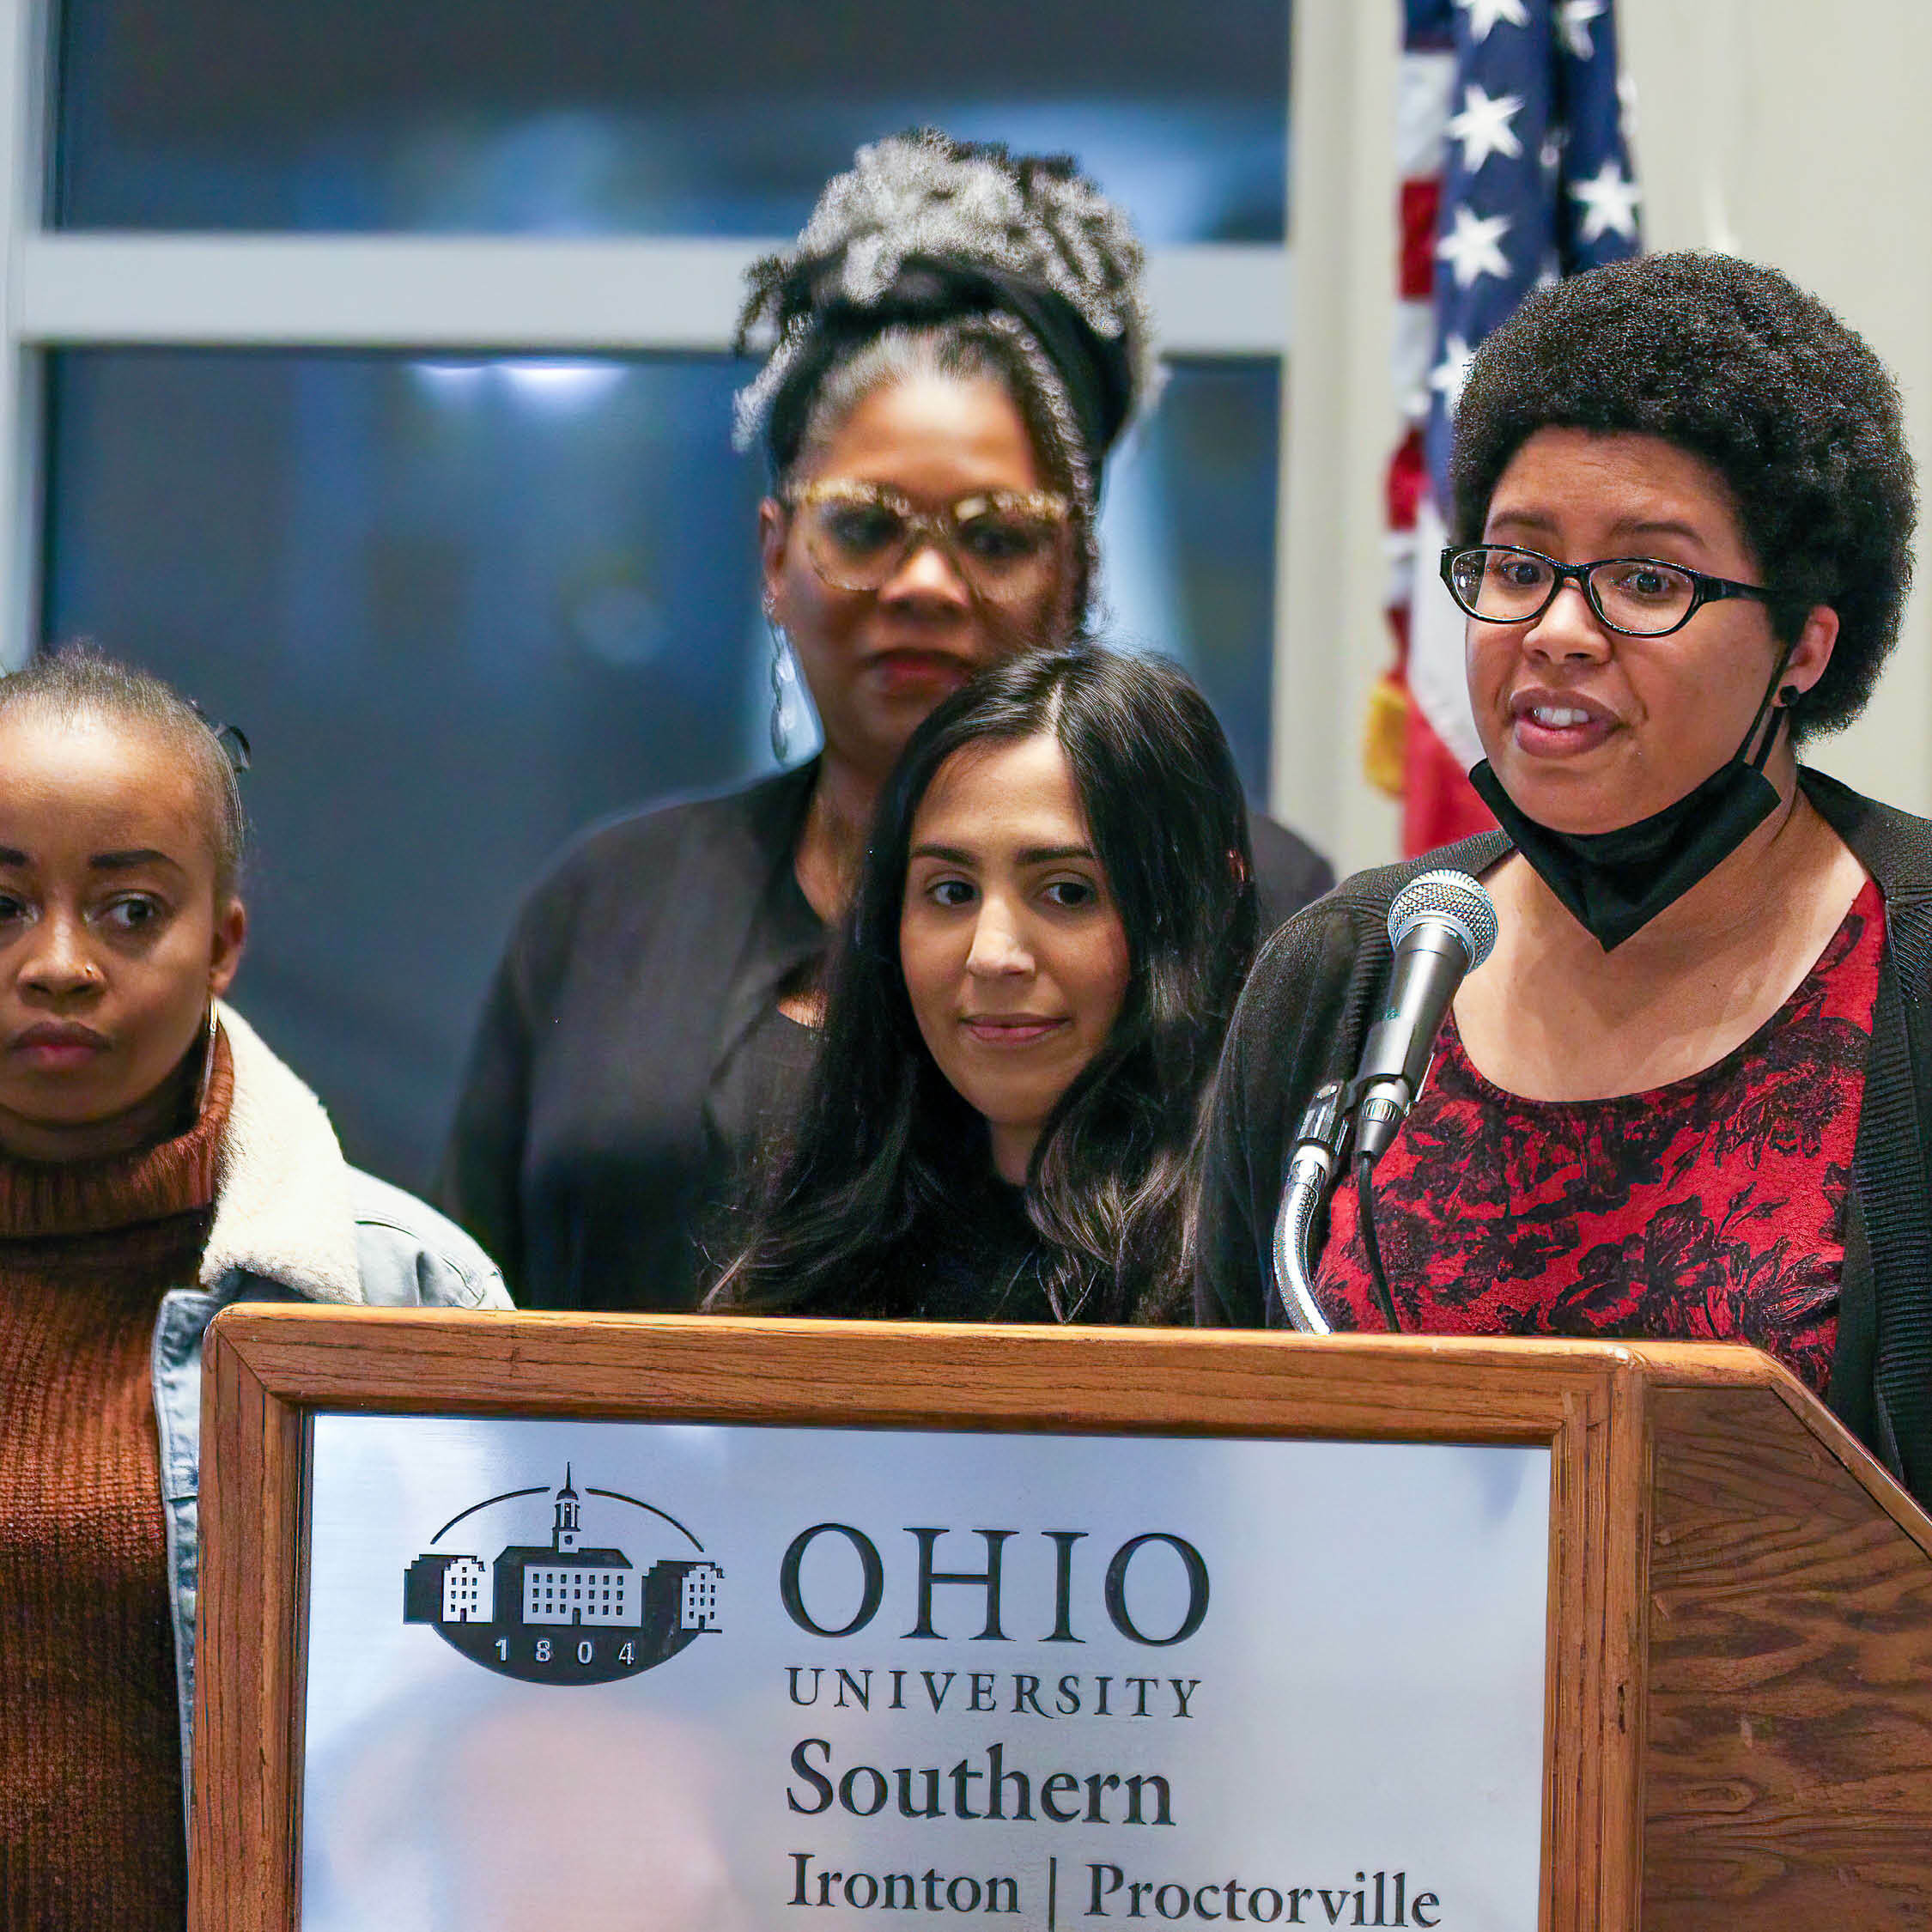 Ohio University Southern Legacy Awards nominations now open, awards honor those promoting Dr. King’s legacy